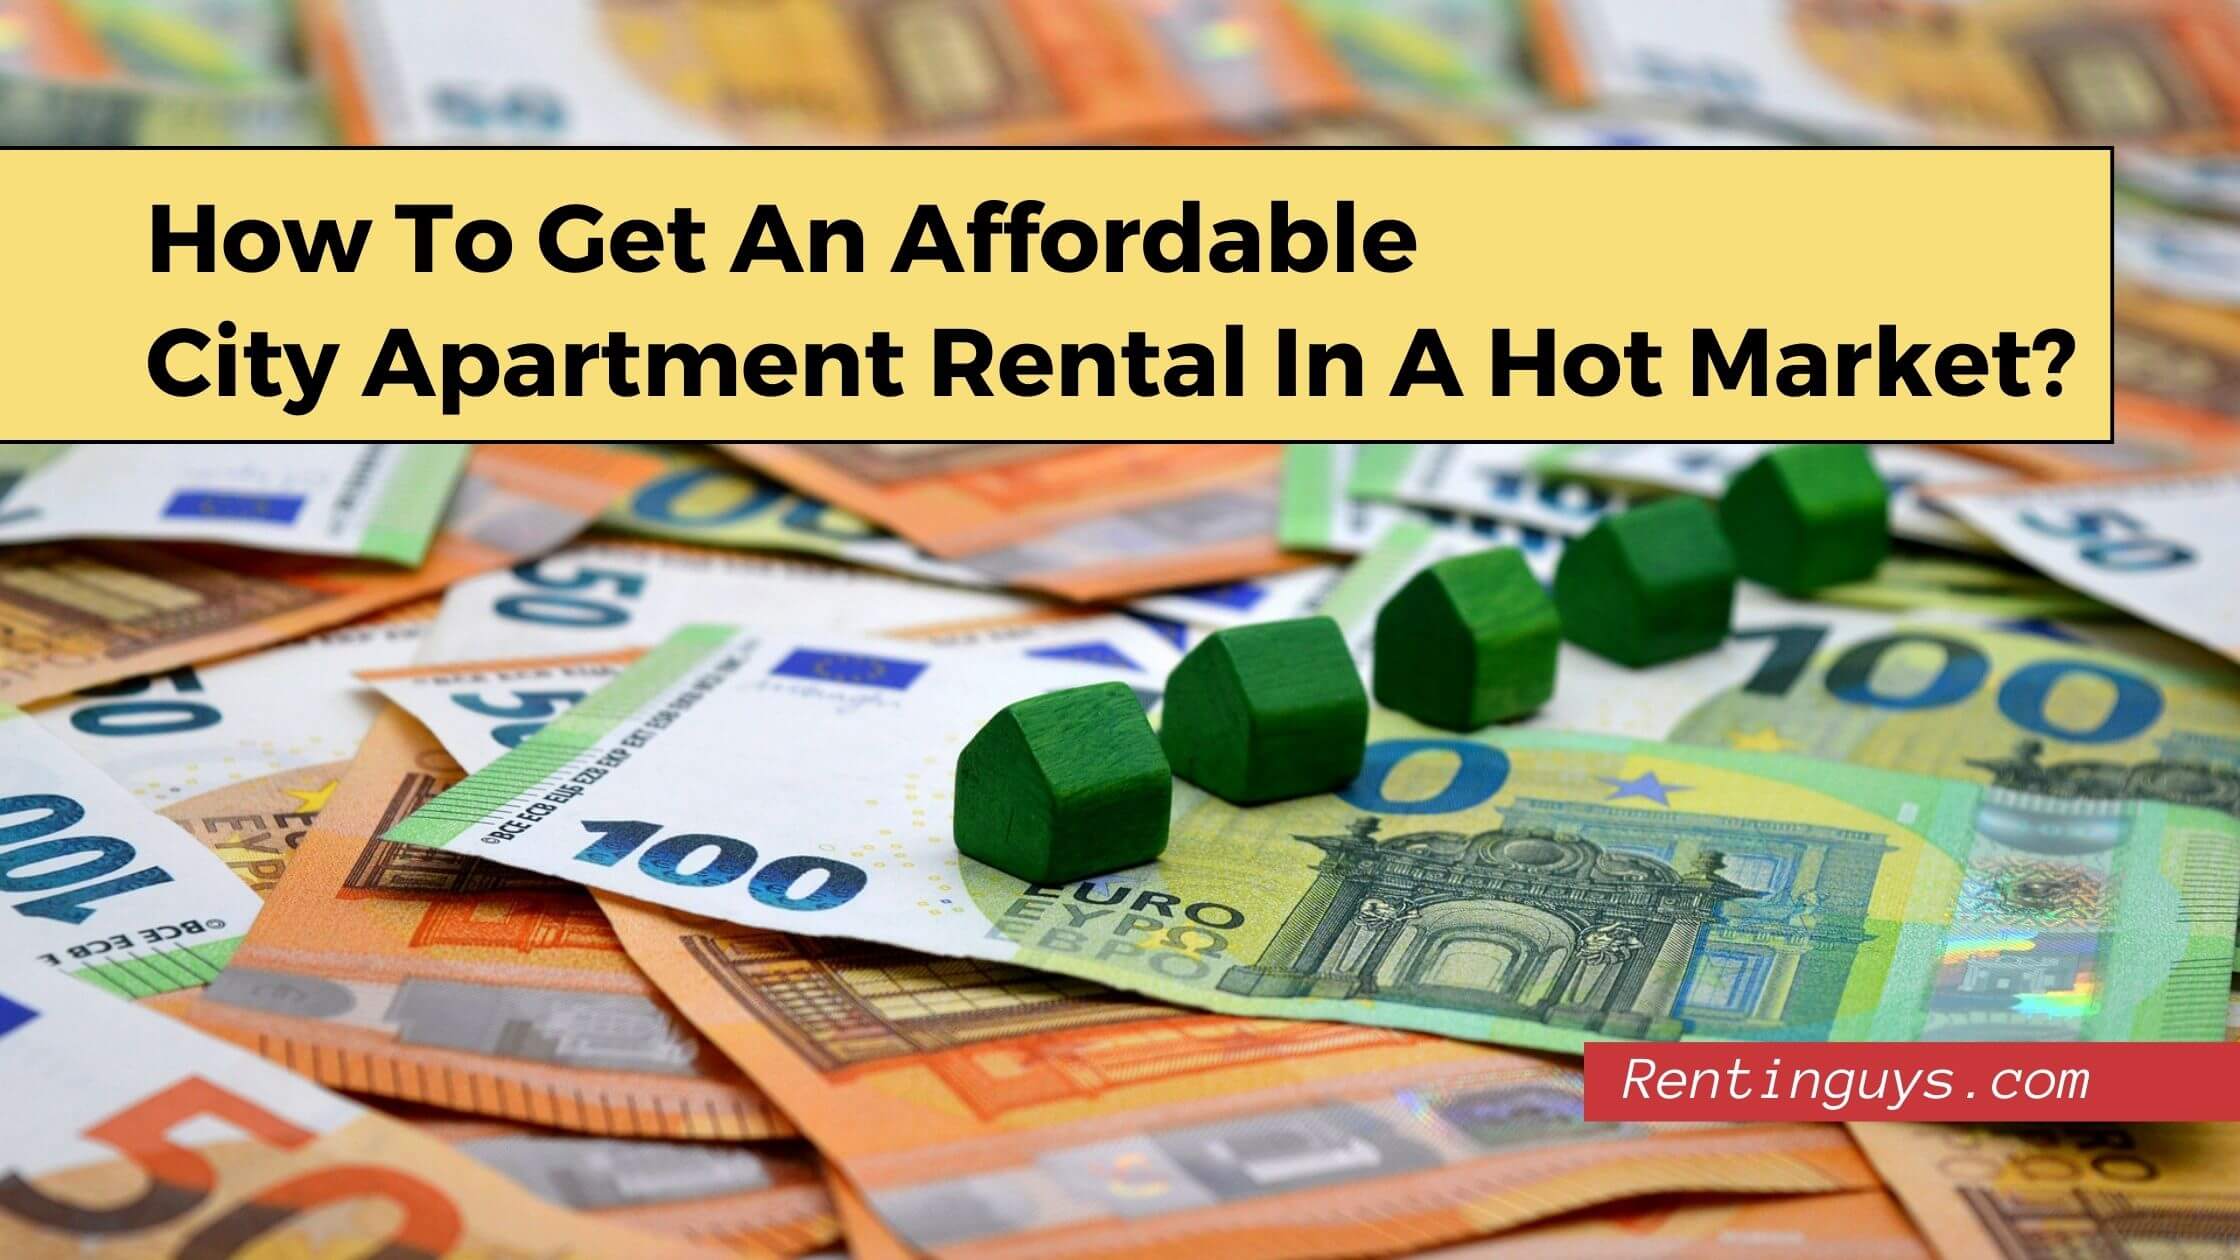 How To Get An Affordable City Apartment Rental In A Hot Market